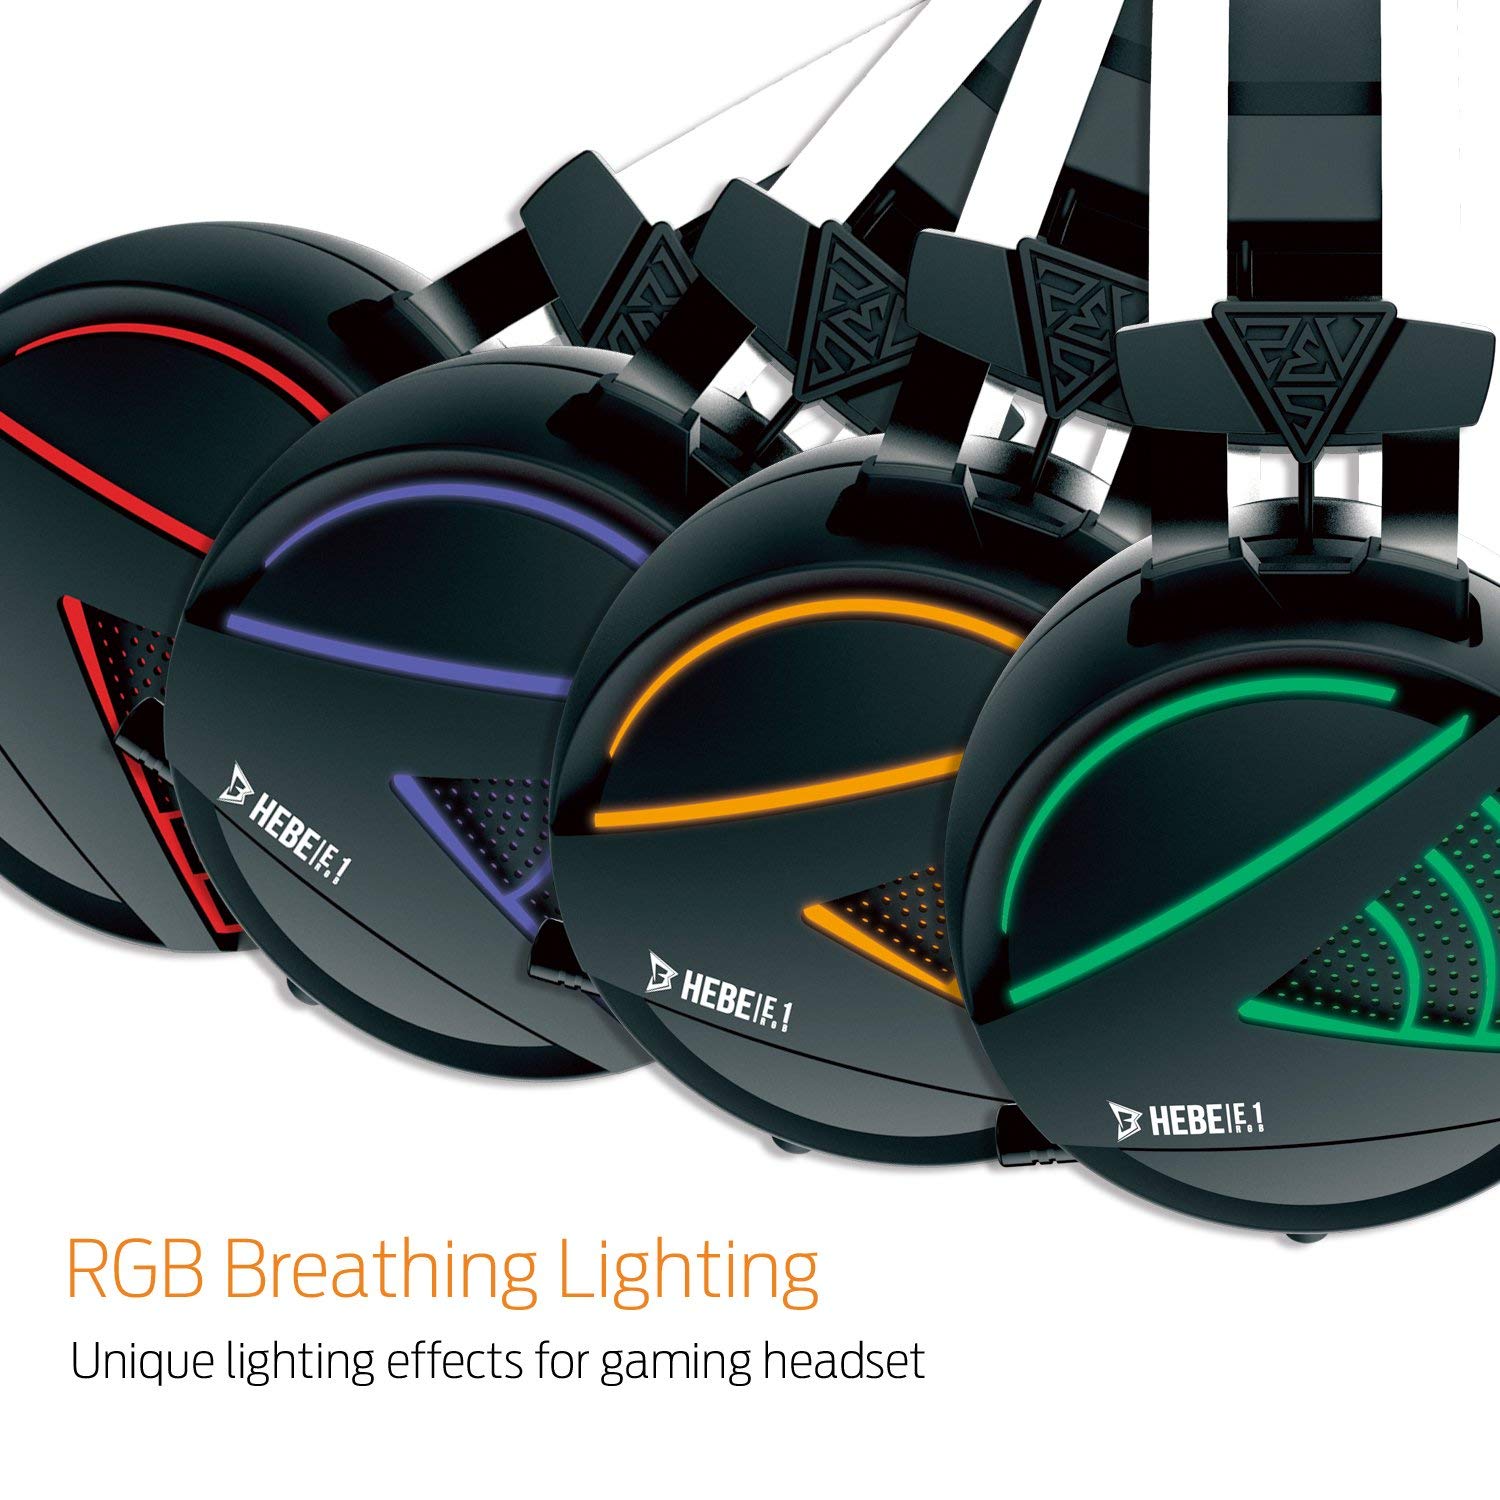 GAMDIAS Gaming Headset with USB/3.5mm Jack, 40mm Drivers, In-line Remote and RGB Lighting (HEBE E1)